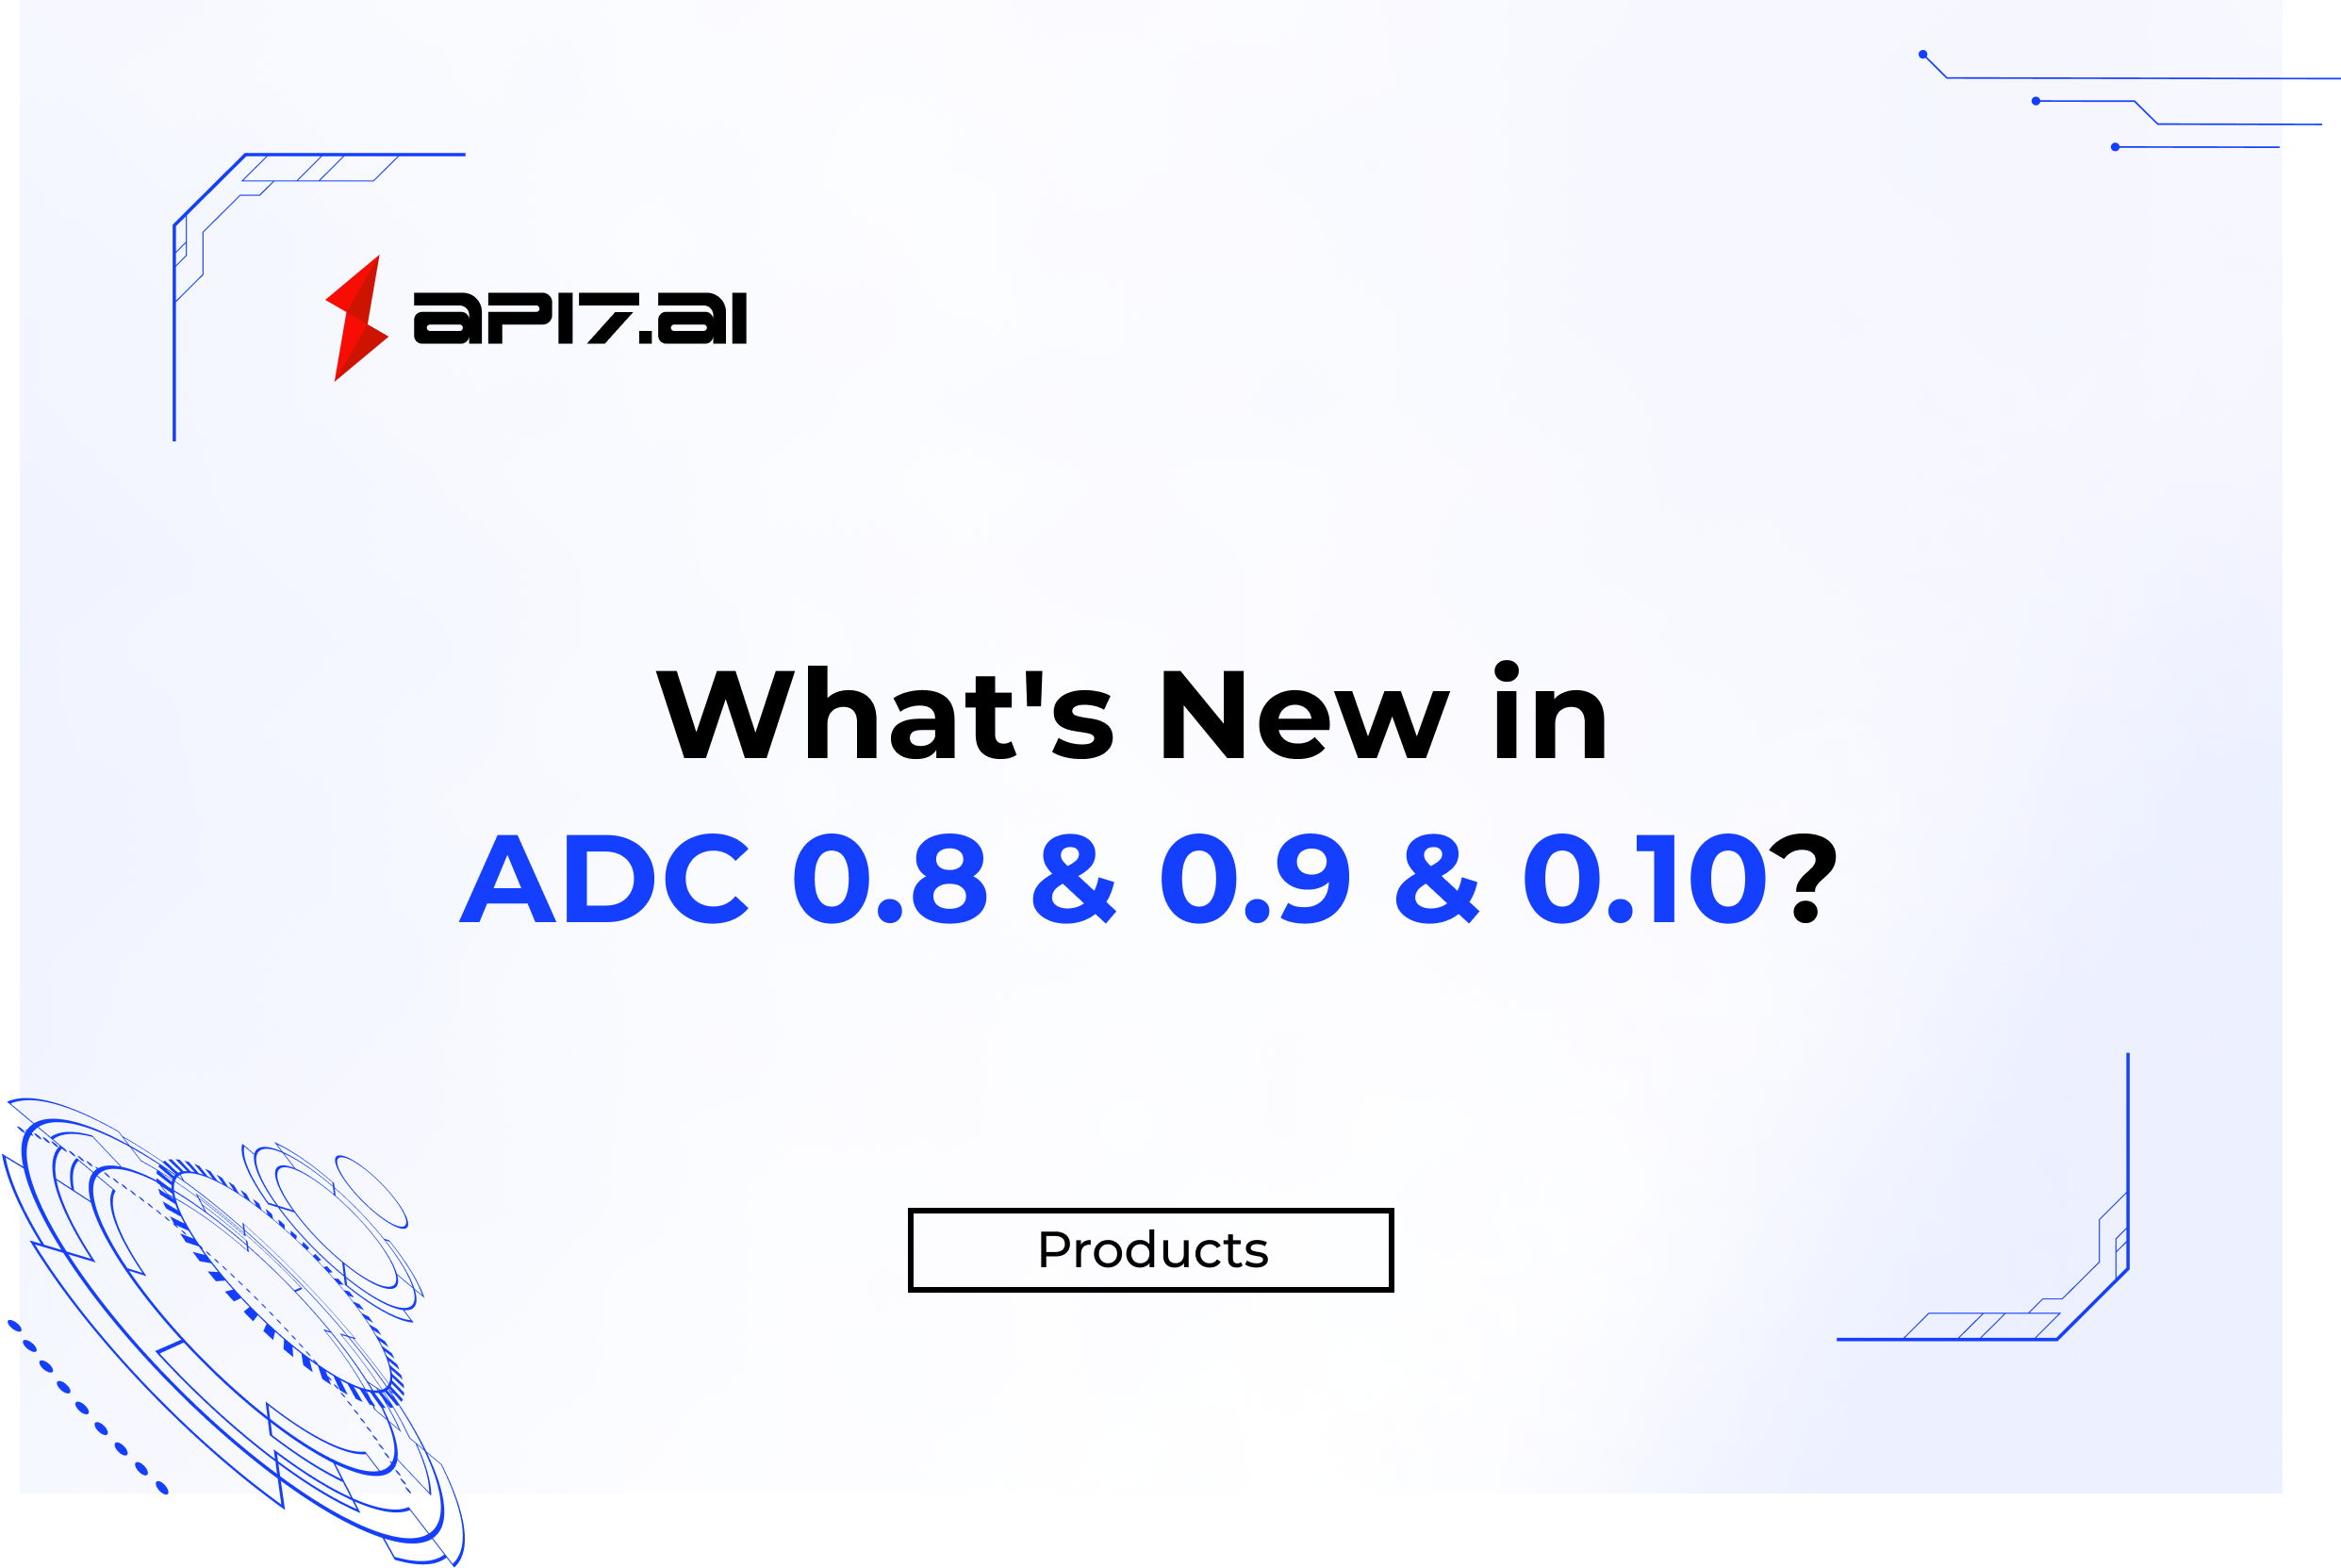 What's New in ADC 0.8 & 0.9 & 0.10?